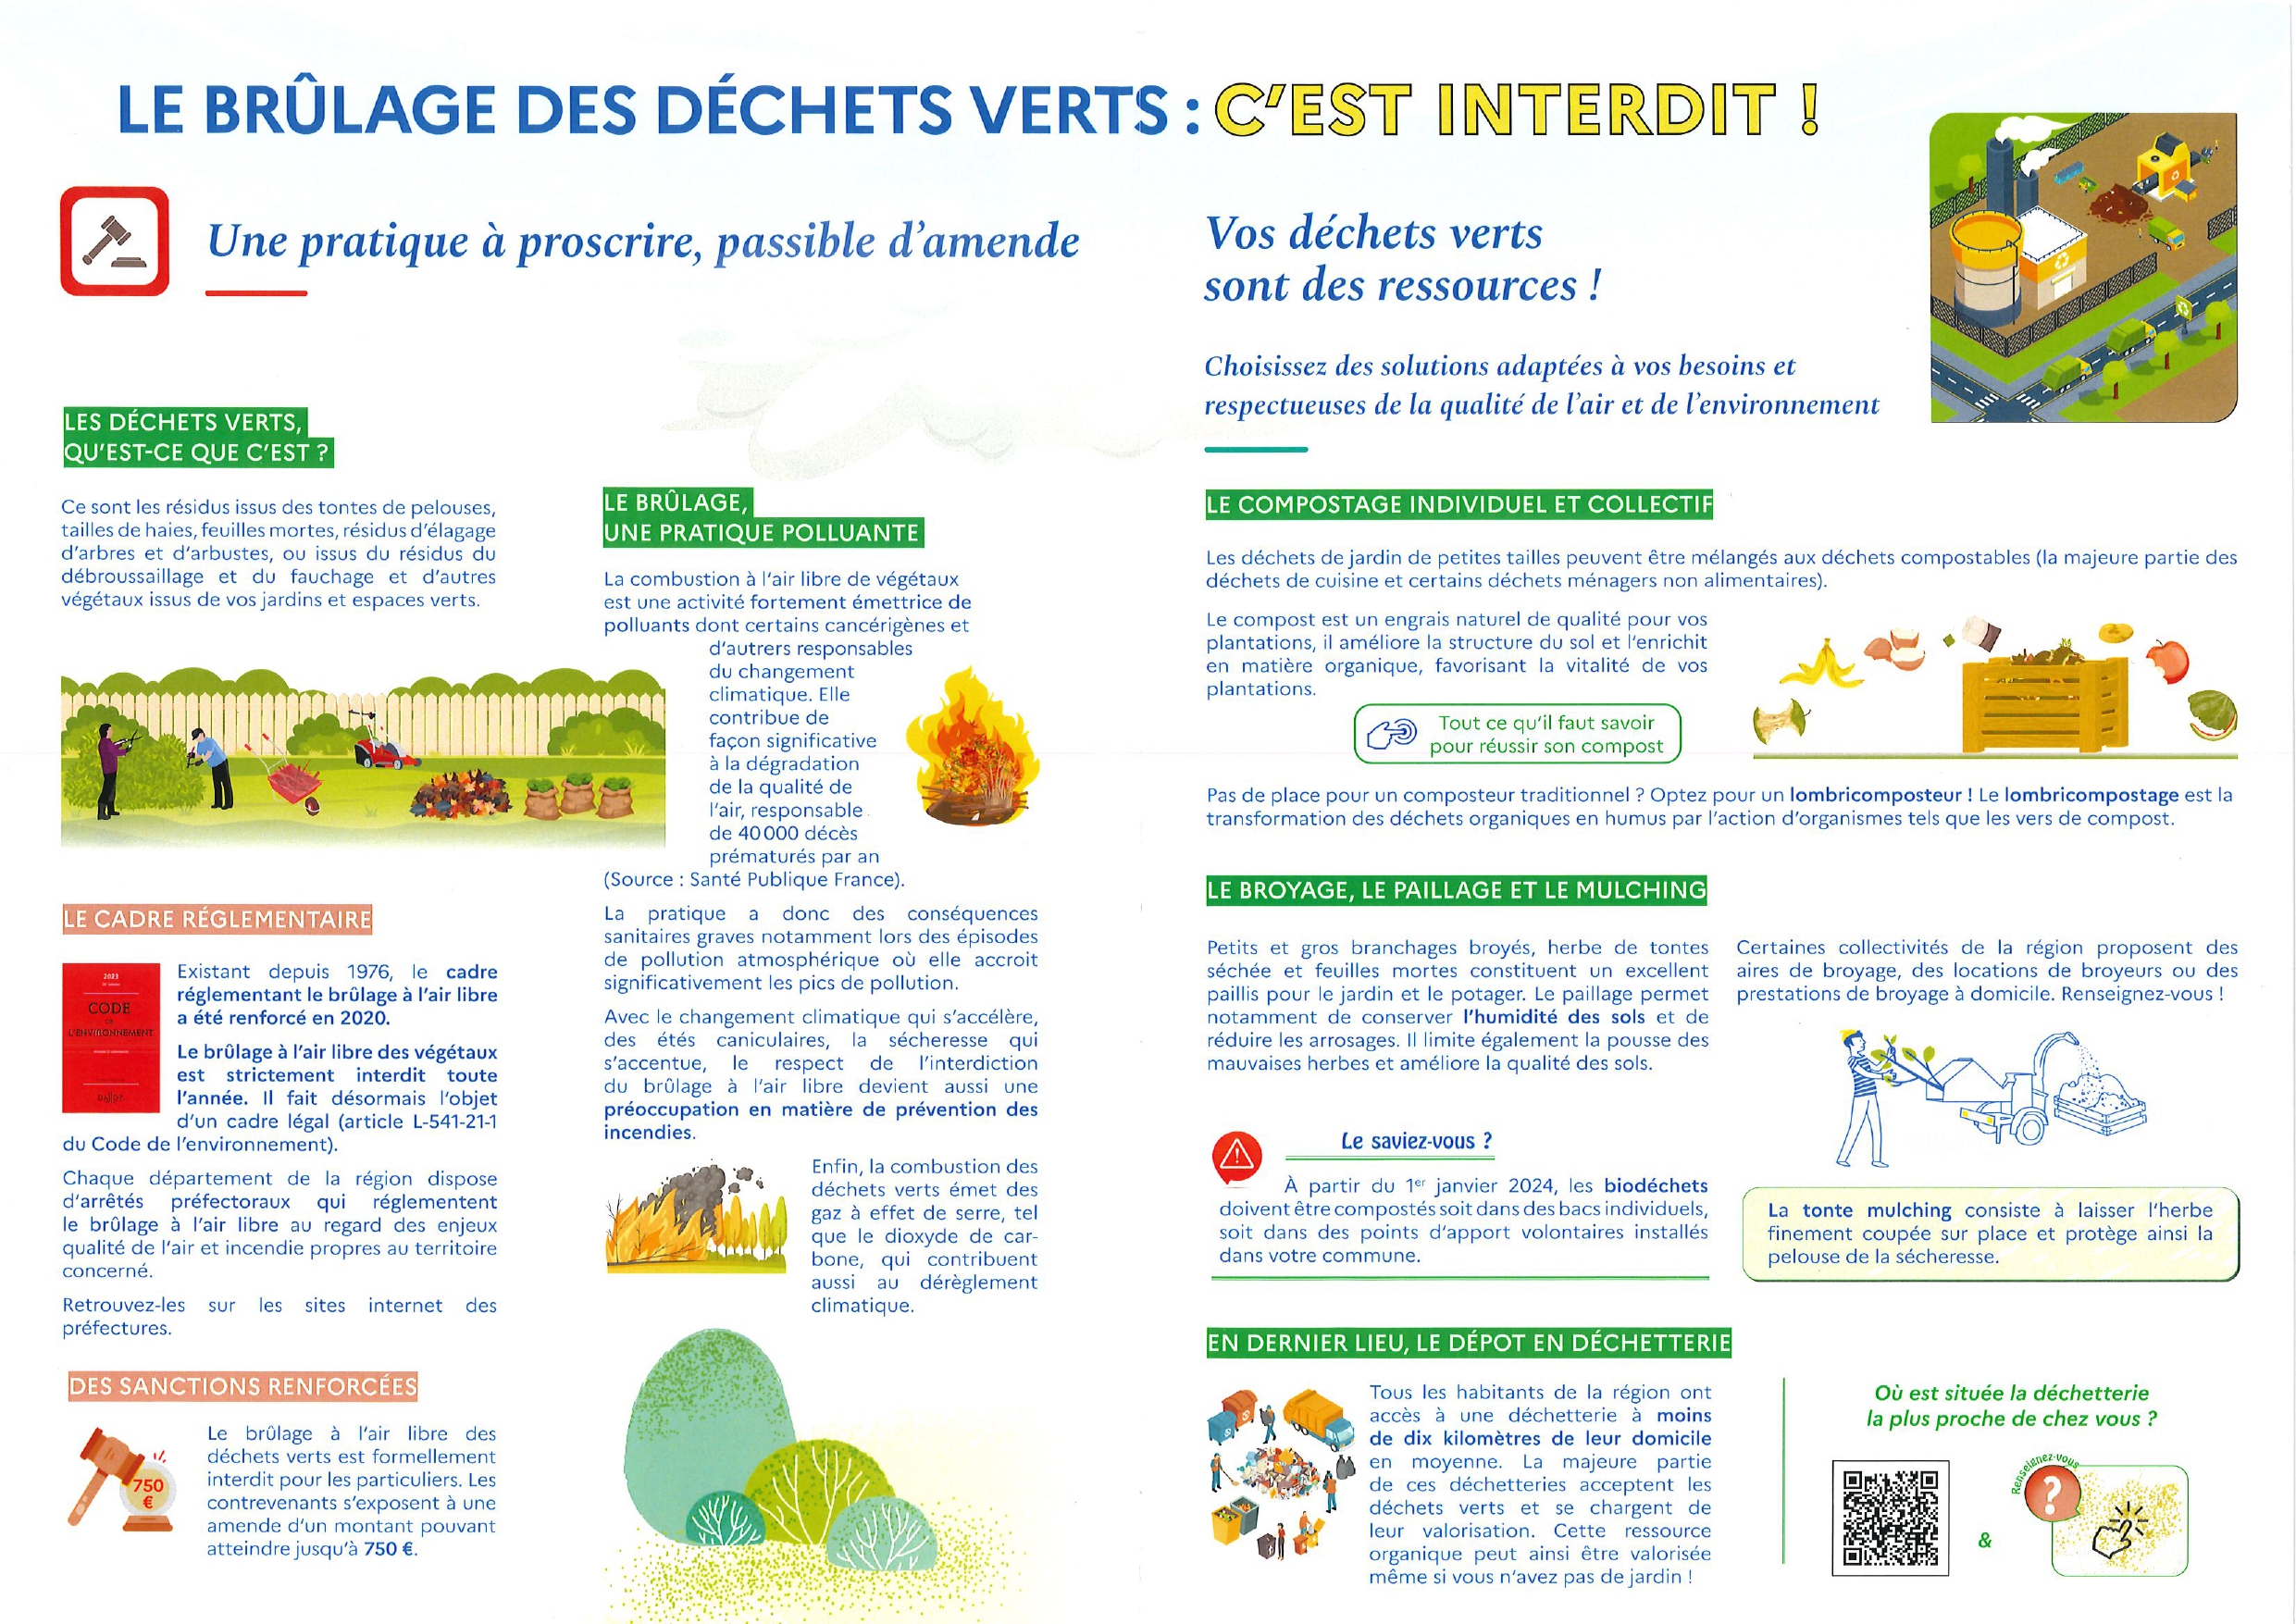 BRULAGE DECHETS VERTS PAGE INTERIEURE_page-0001.jpg